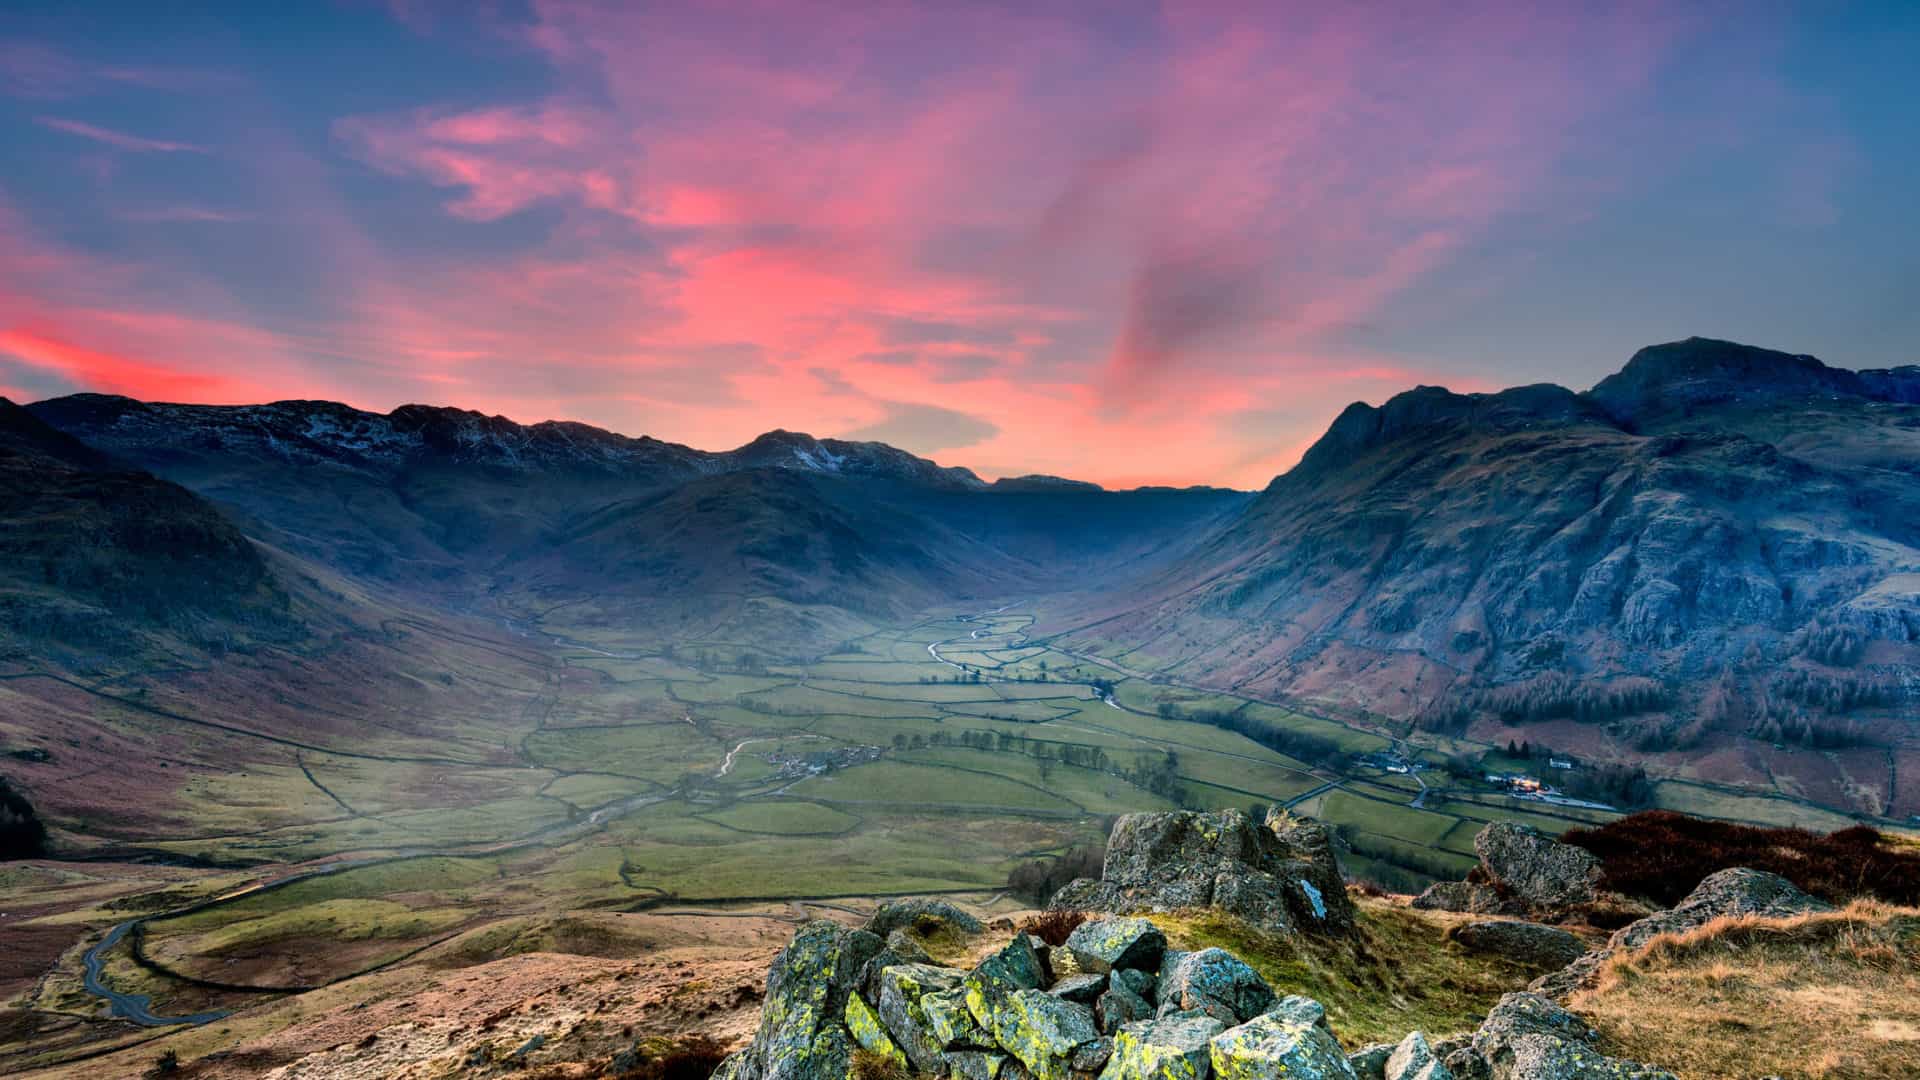 A photo of the Lake District National Park in England.